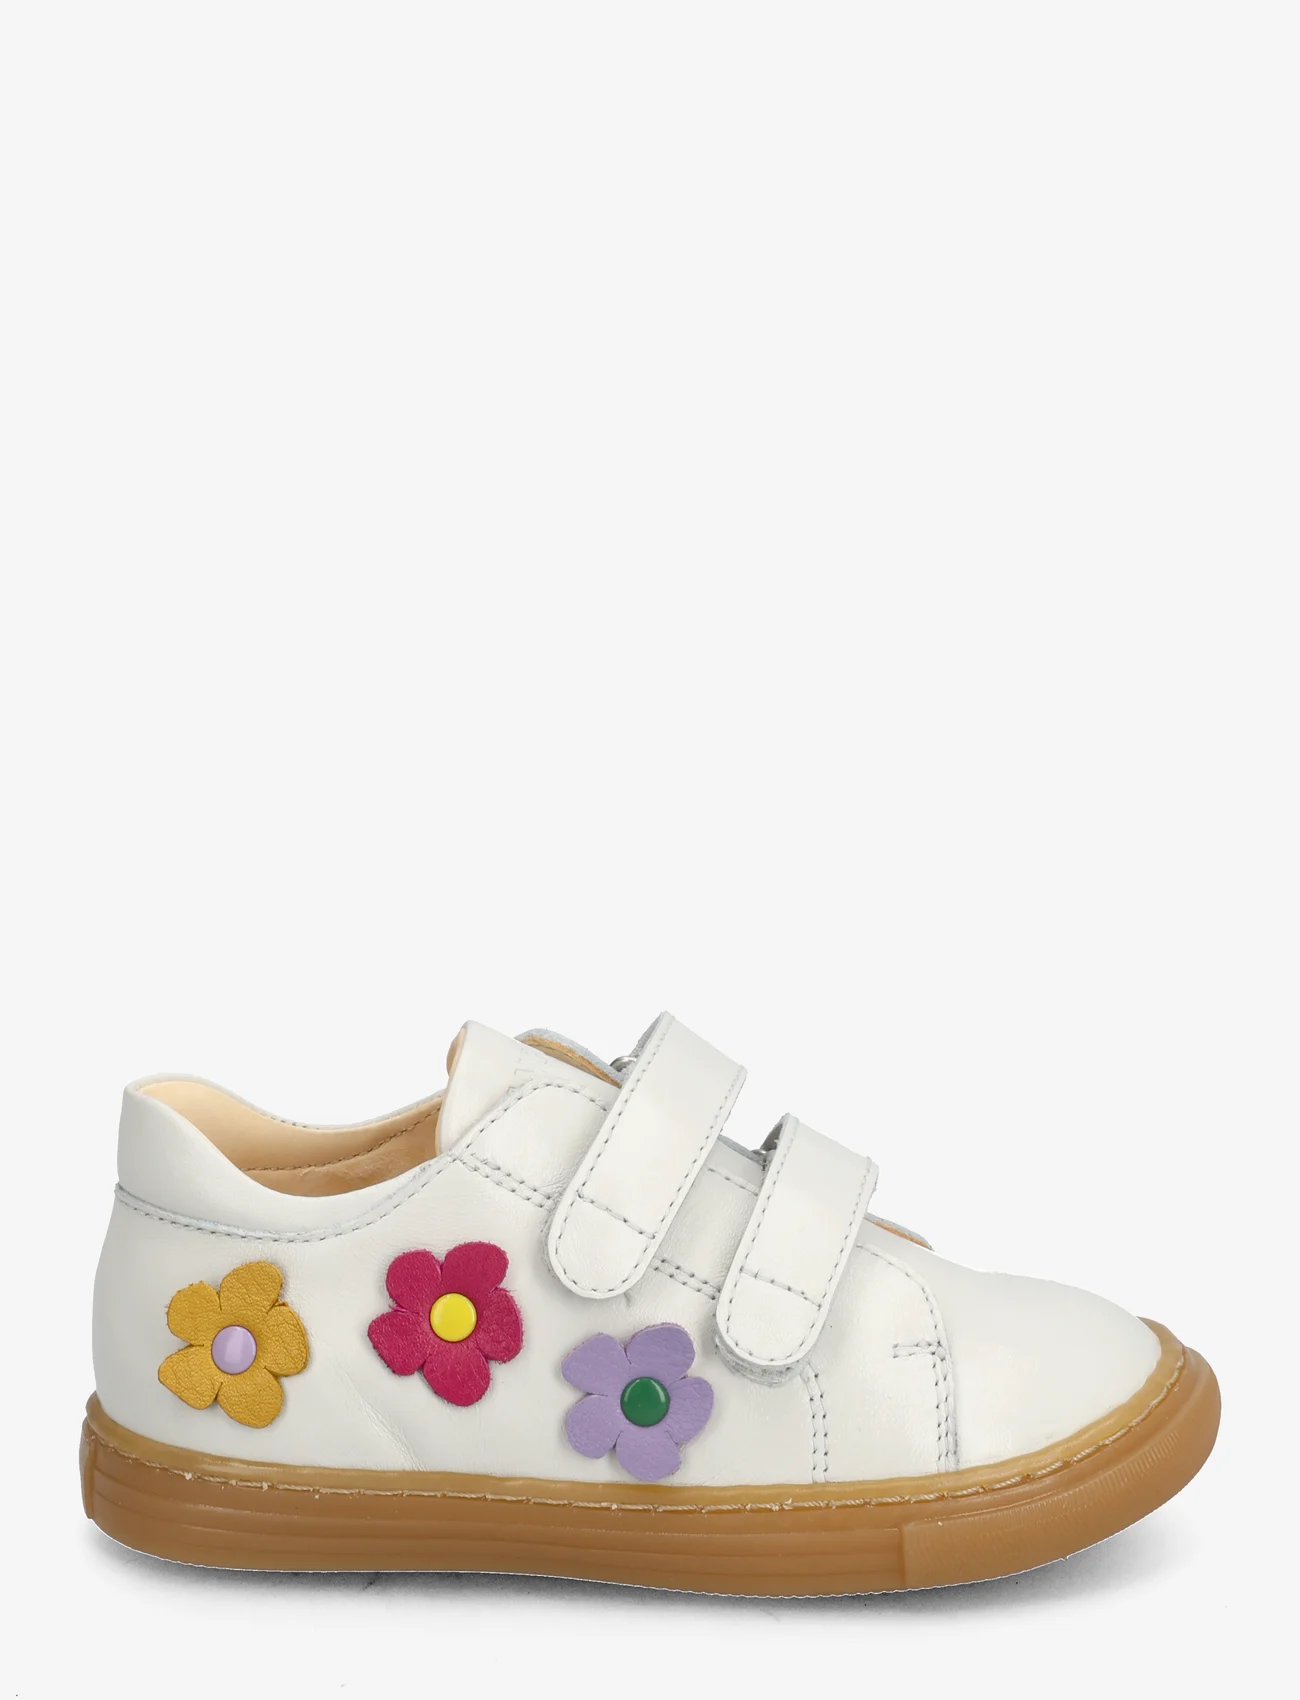 ANGULUS - Shoes - flat - with velcro - sommarfynd - 1493/a001 off white/flowers - 1